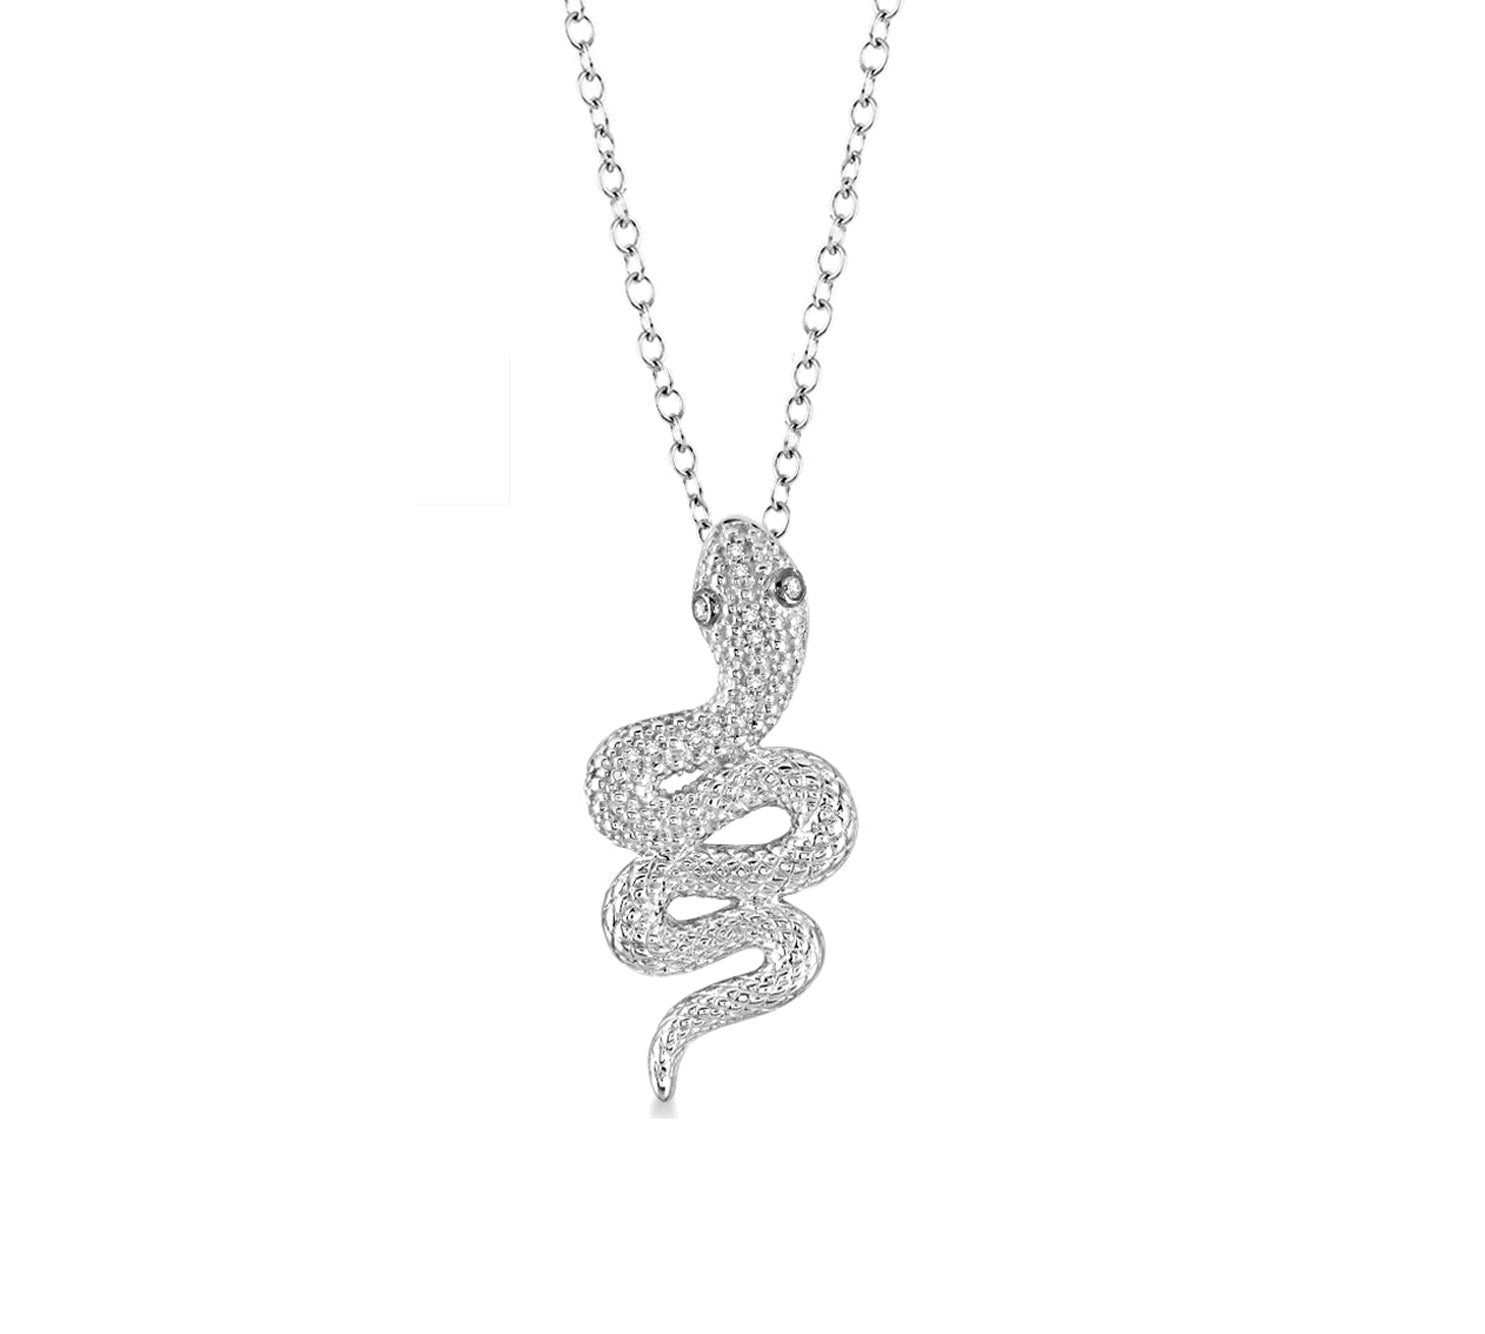 Snake Pendant Necklace with Diamonds in Sterling Silver